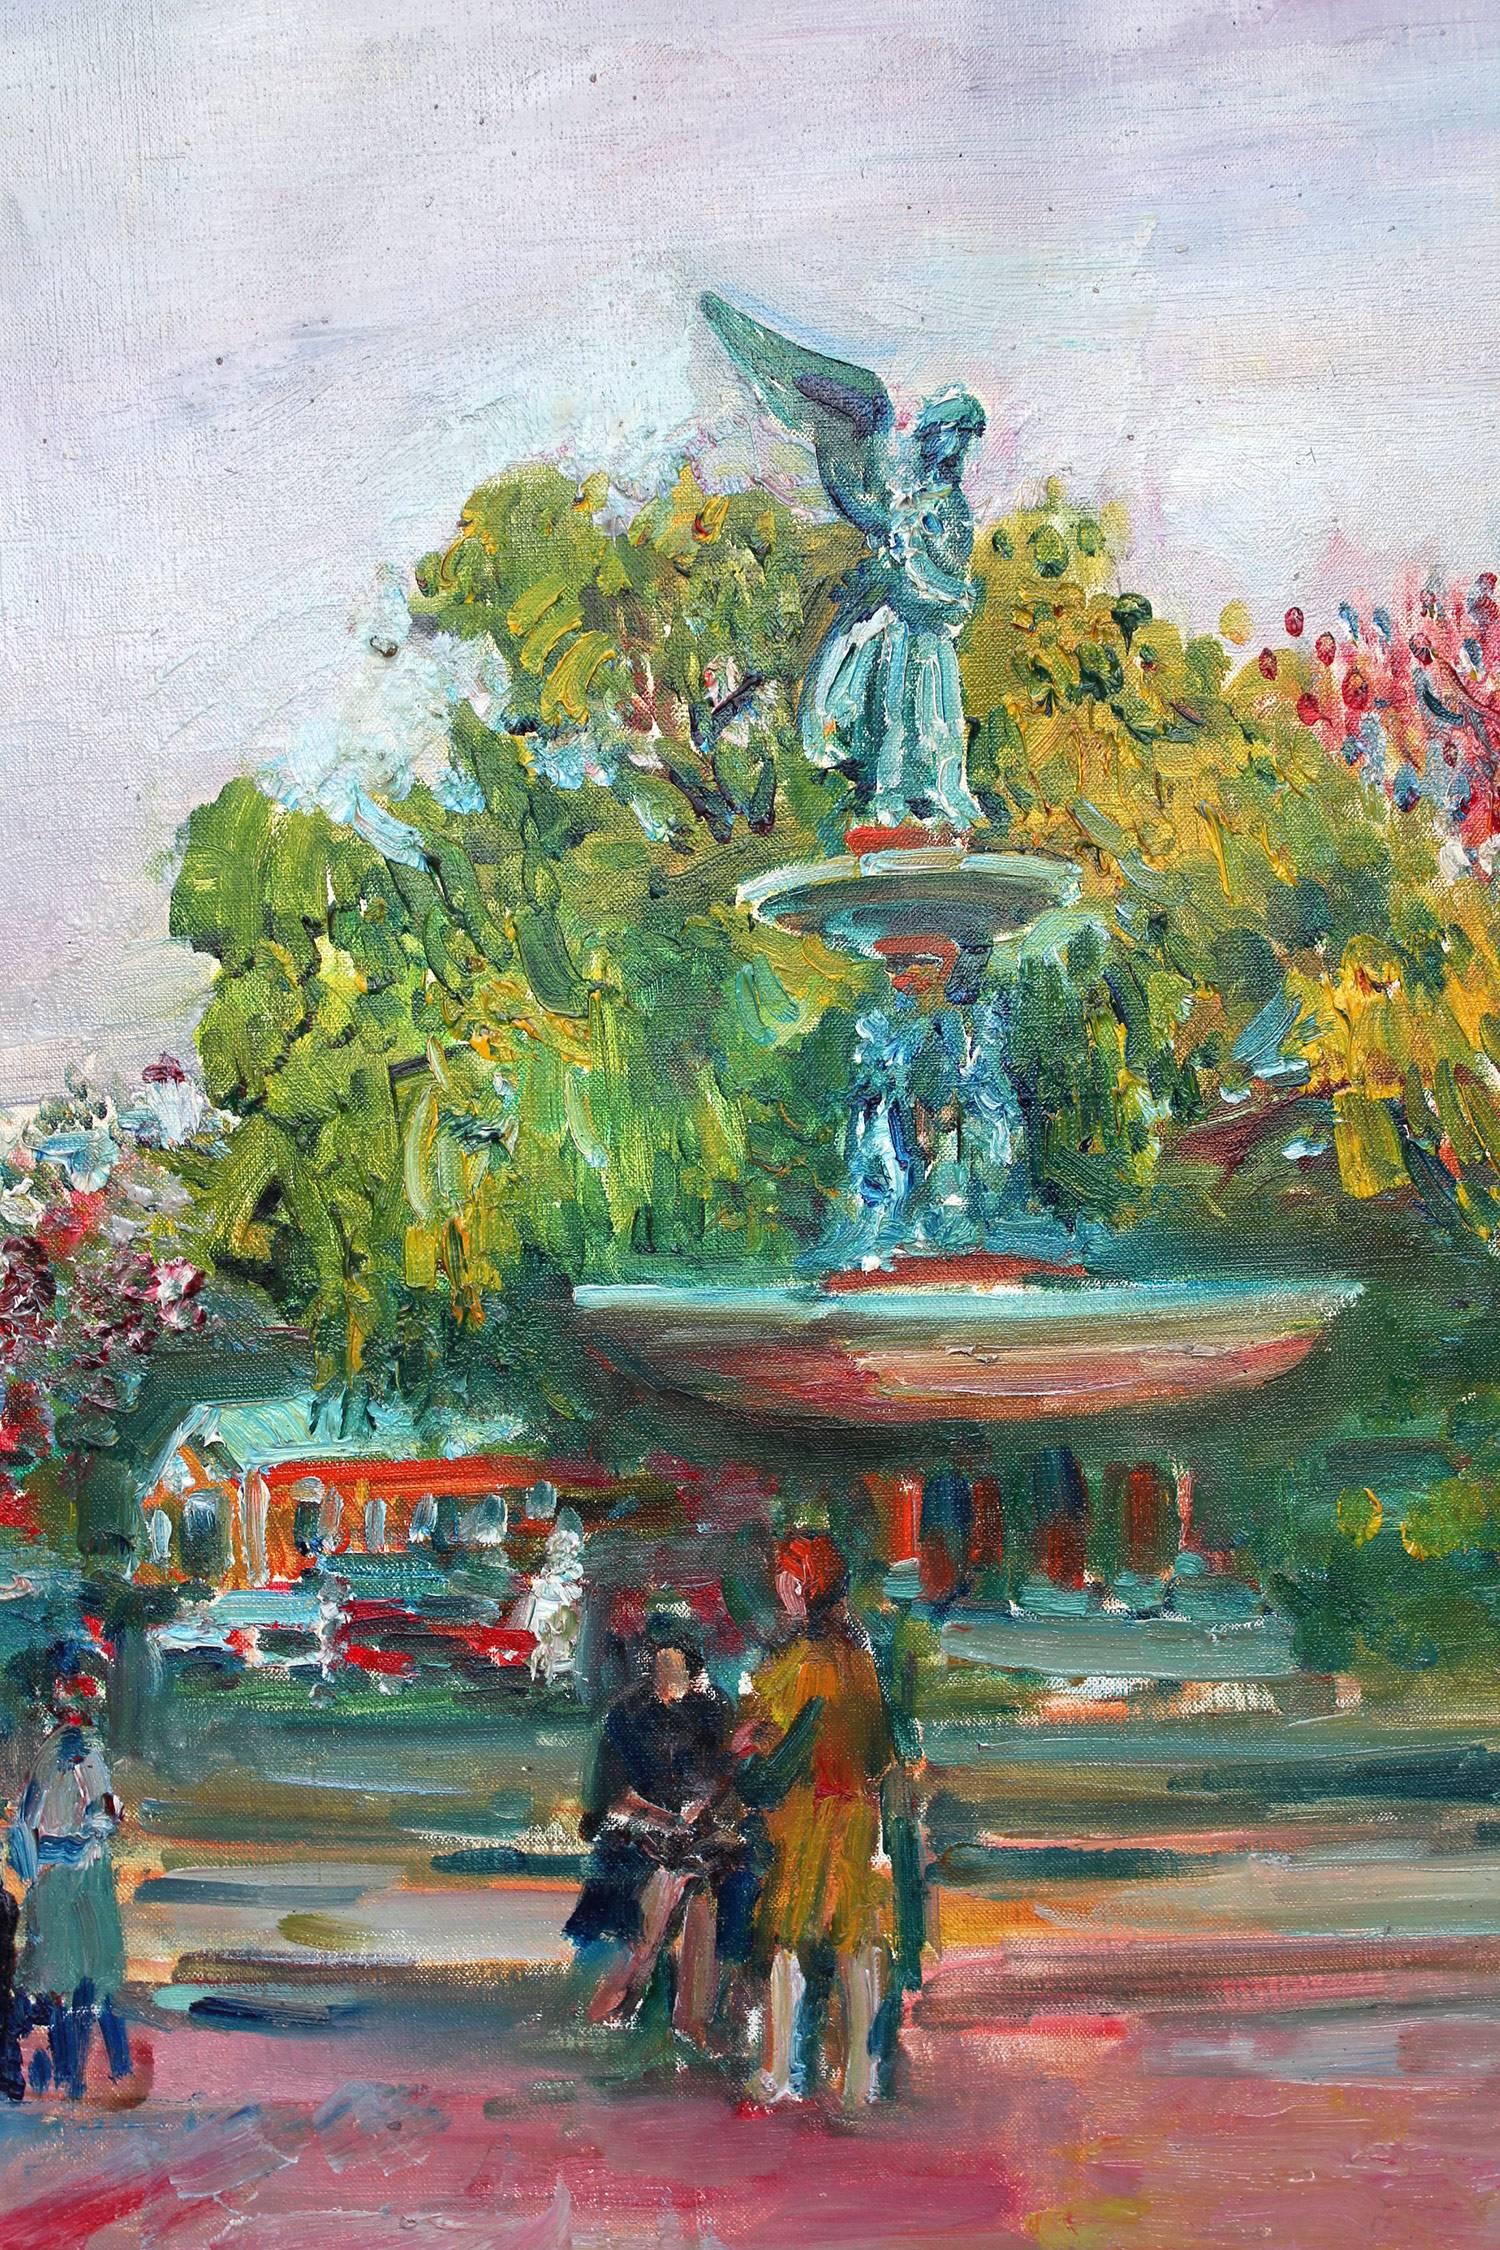 Bethesda Fountain in New York City's Central Park (Impressionismus), Painting, von Jacques Zucker